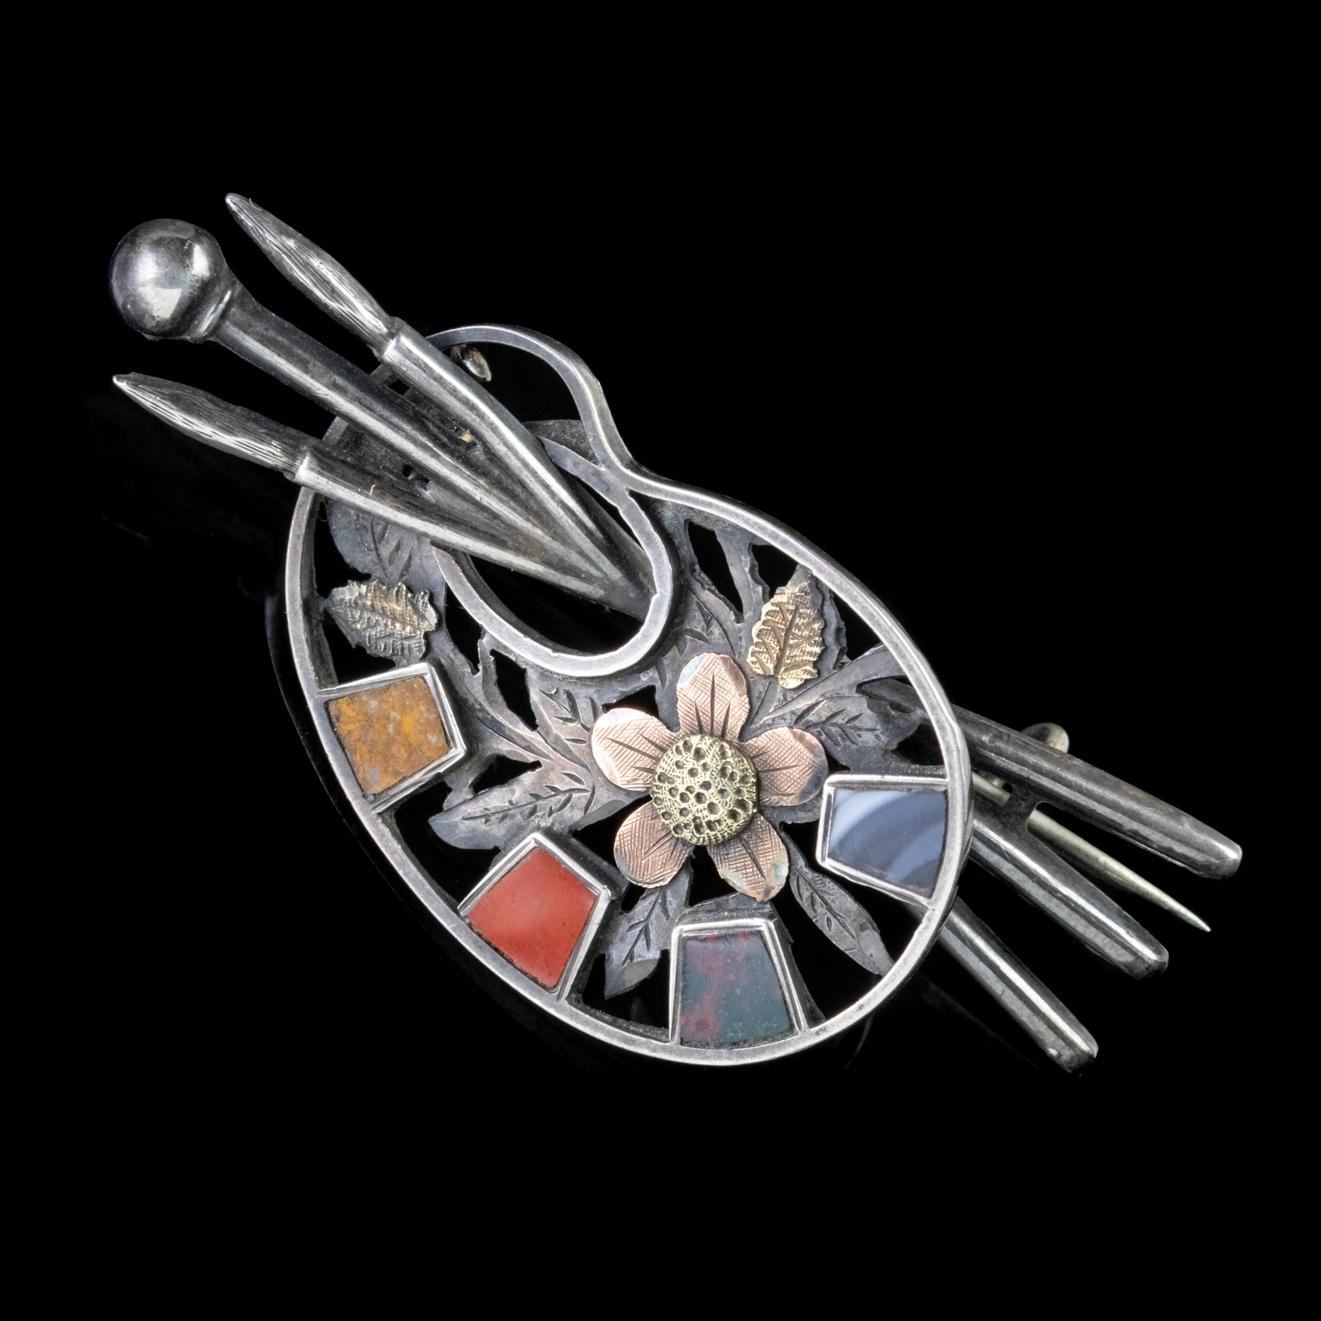 A unique Antique Victorian Scottish brooch modelled in solid Silver, depicting a wonderful paint palette decorated with Golden flowers and brushes threaded through the middle.

Four sections of Scottish Agate have been set in the palette rather